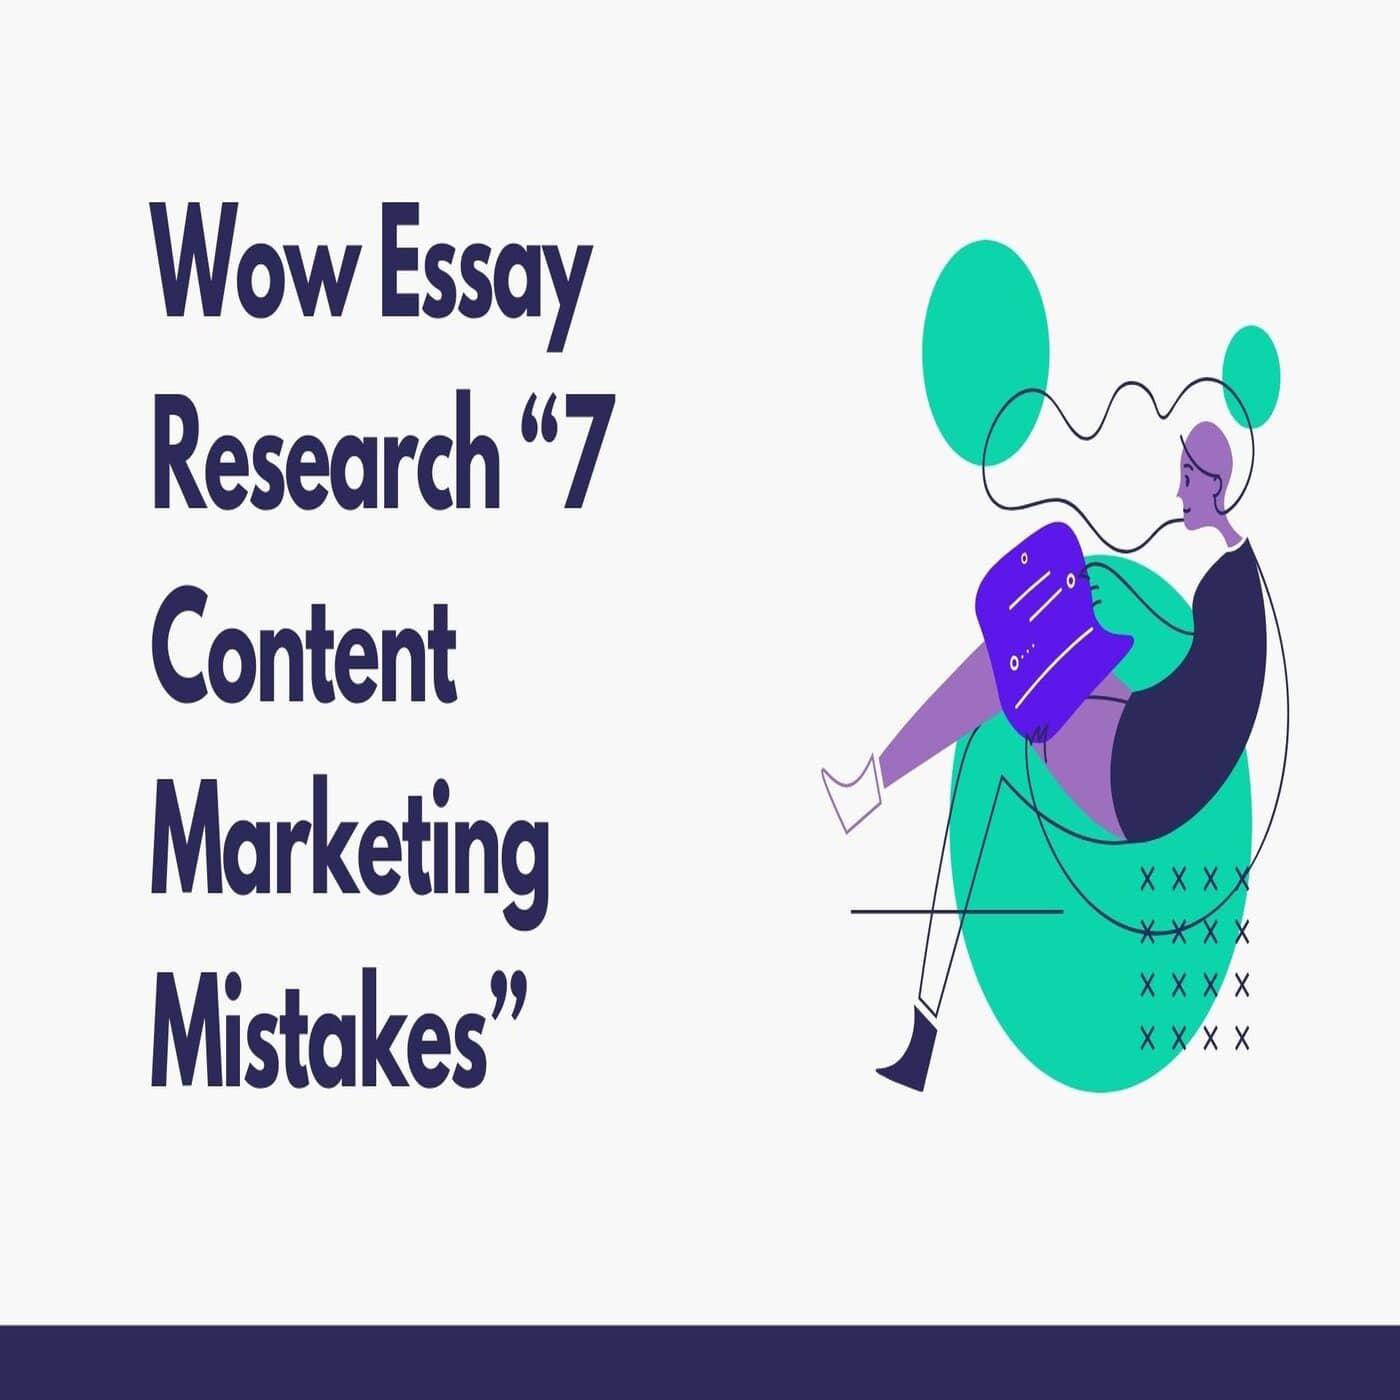 Wow Essay Research “7 Content Marketing Mistakes”